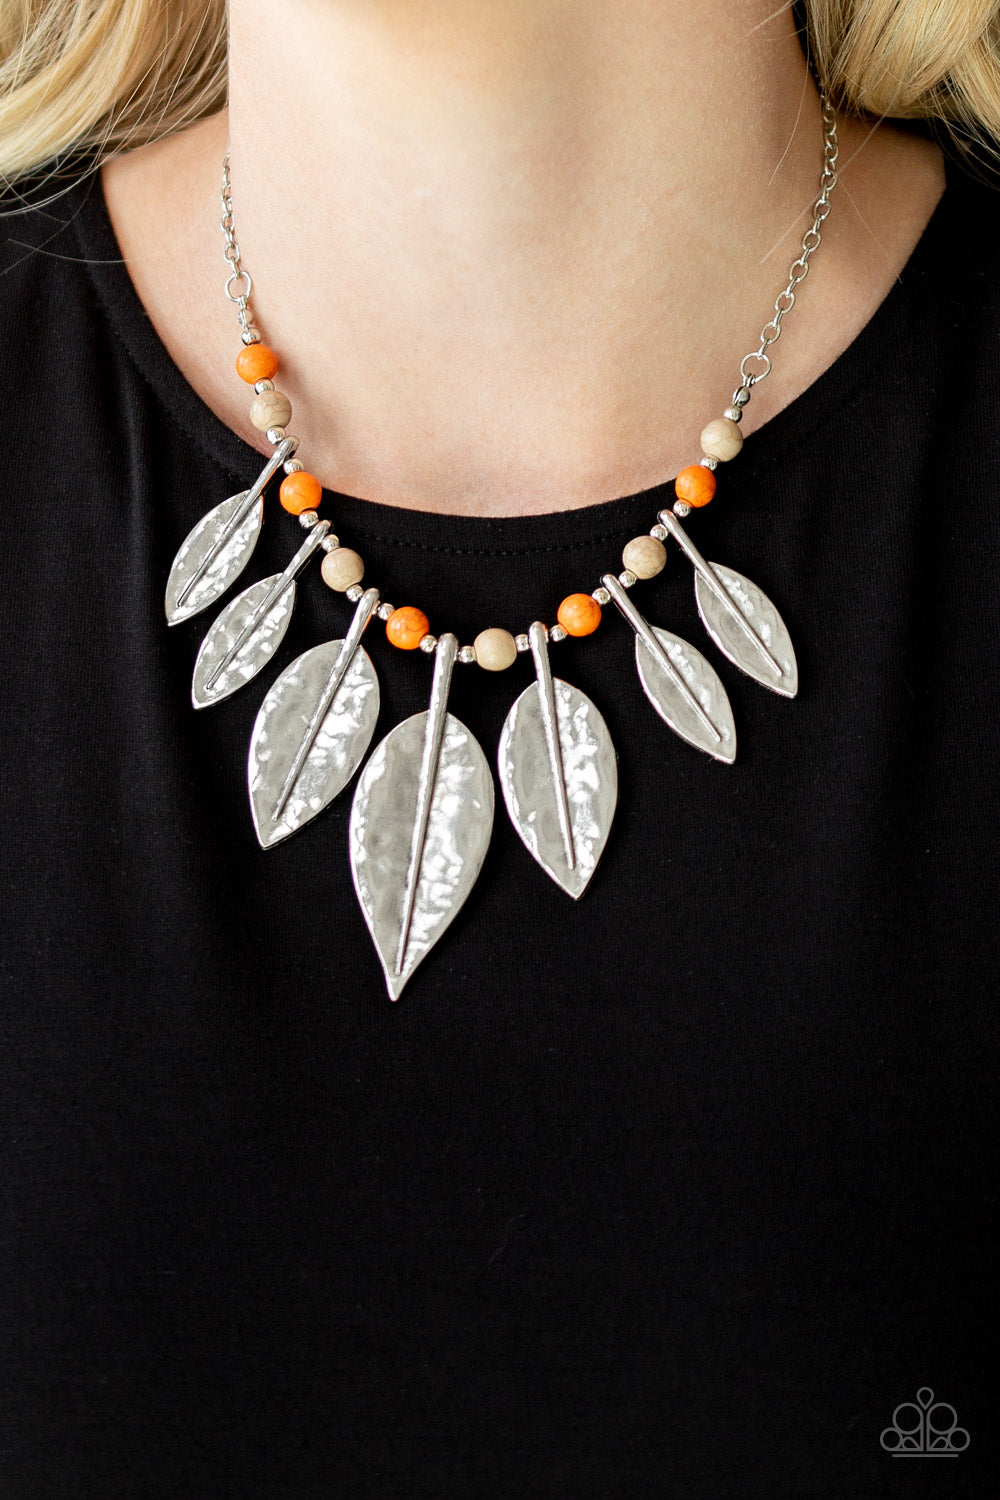 Paparazzi new necklace - Featuring lifelike detail, hammered silver leaf frames are threaded along an invisible wire below the collar. Infused with refreshing orange and brown stone beads, the leafy frames gradually increase in size for an artisan inspired finish. 